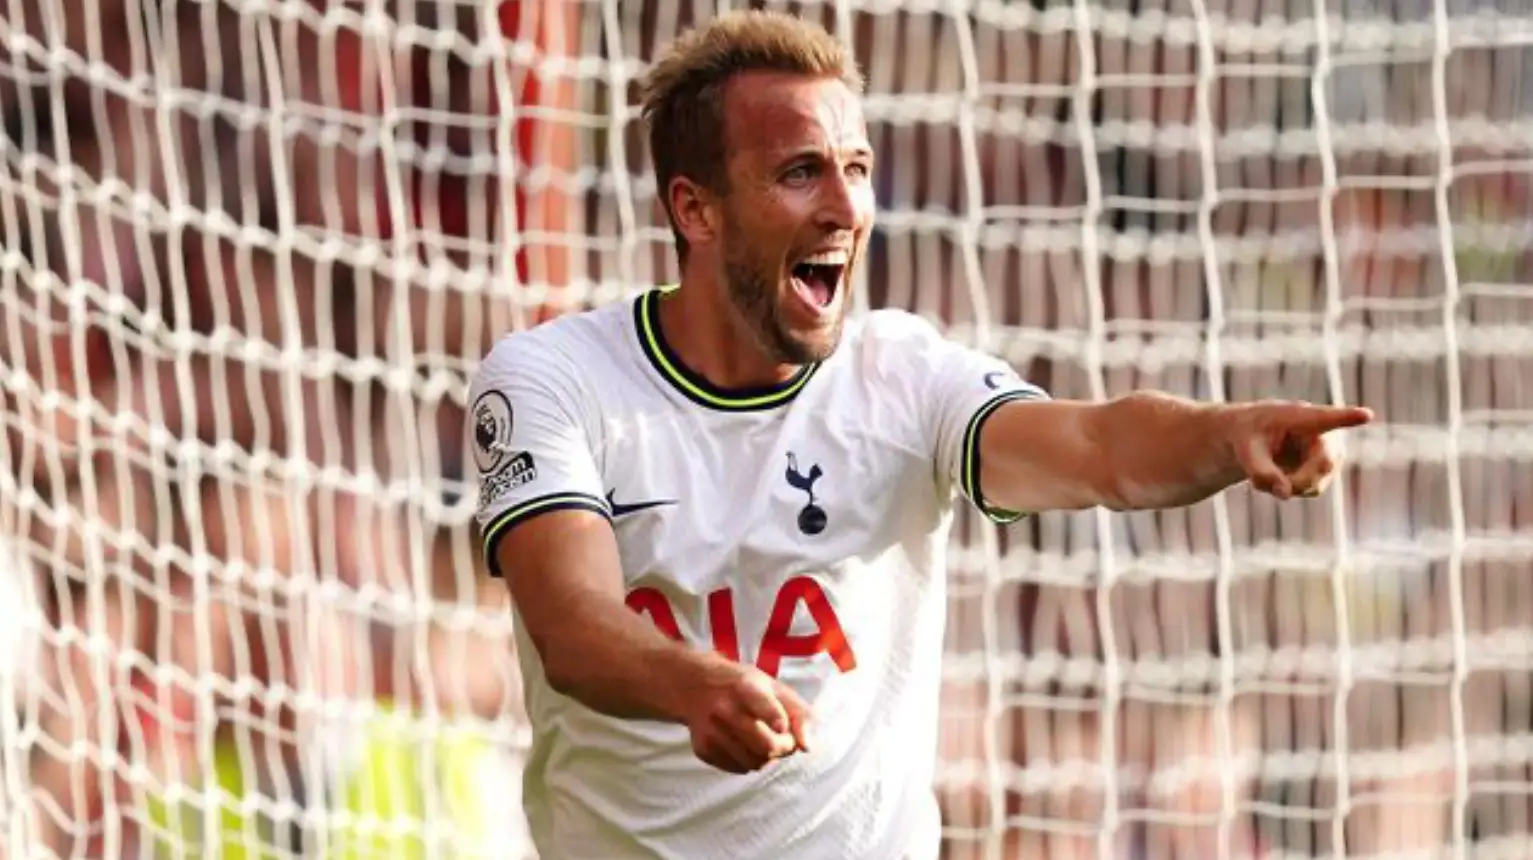 Harry Kane reacts after scoring for Tottenham in the Premier League